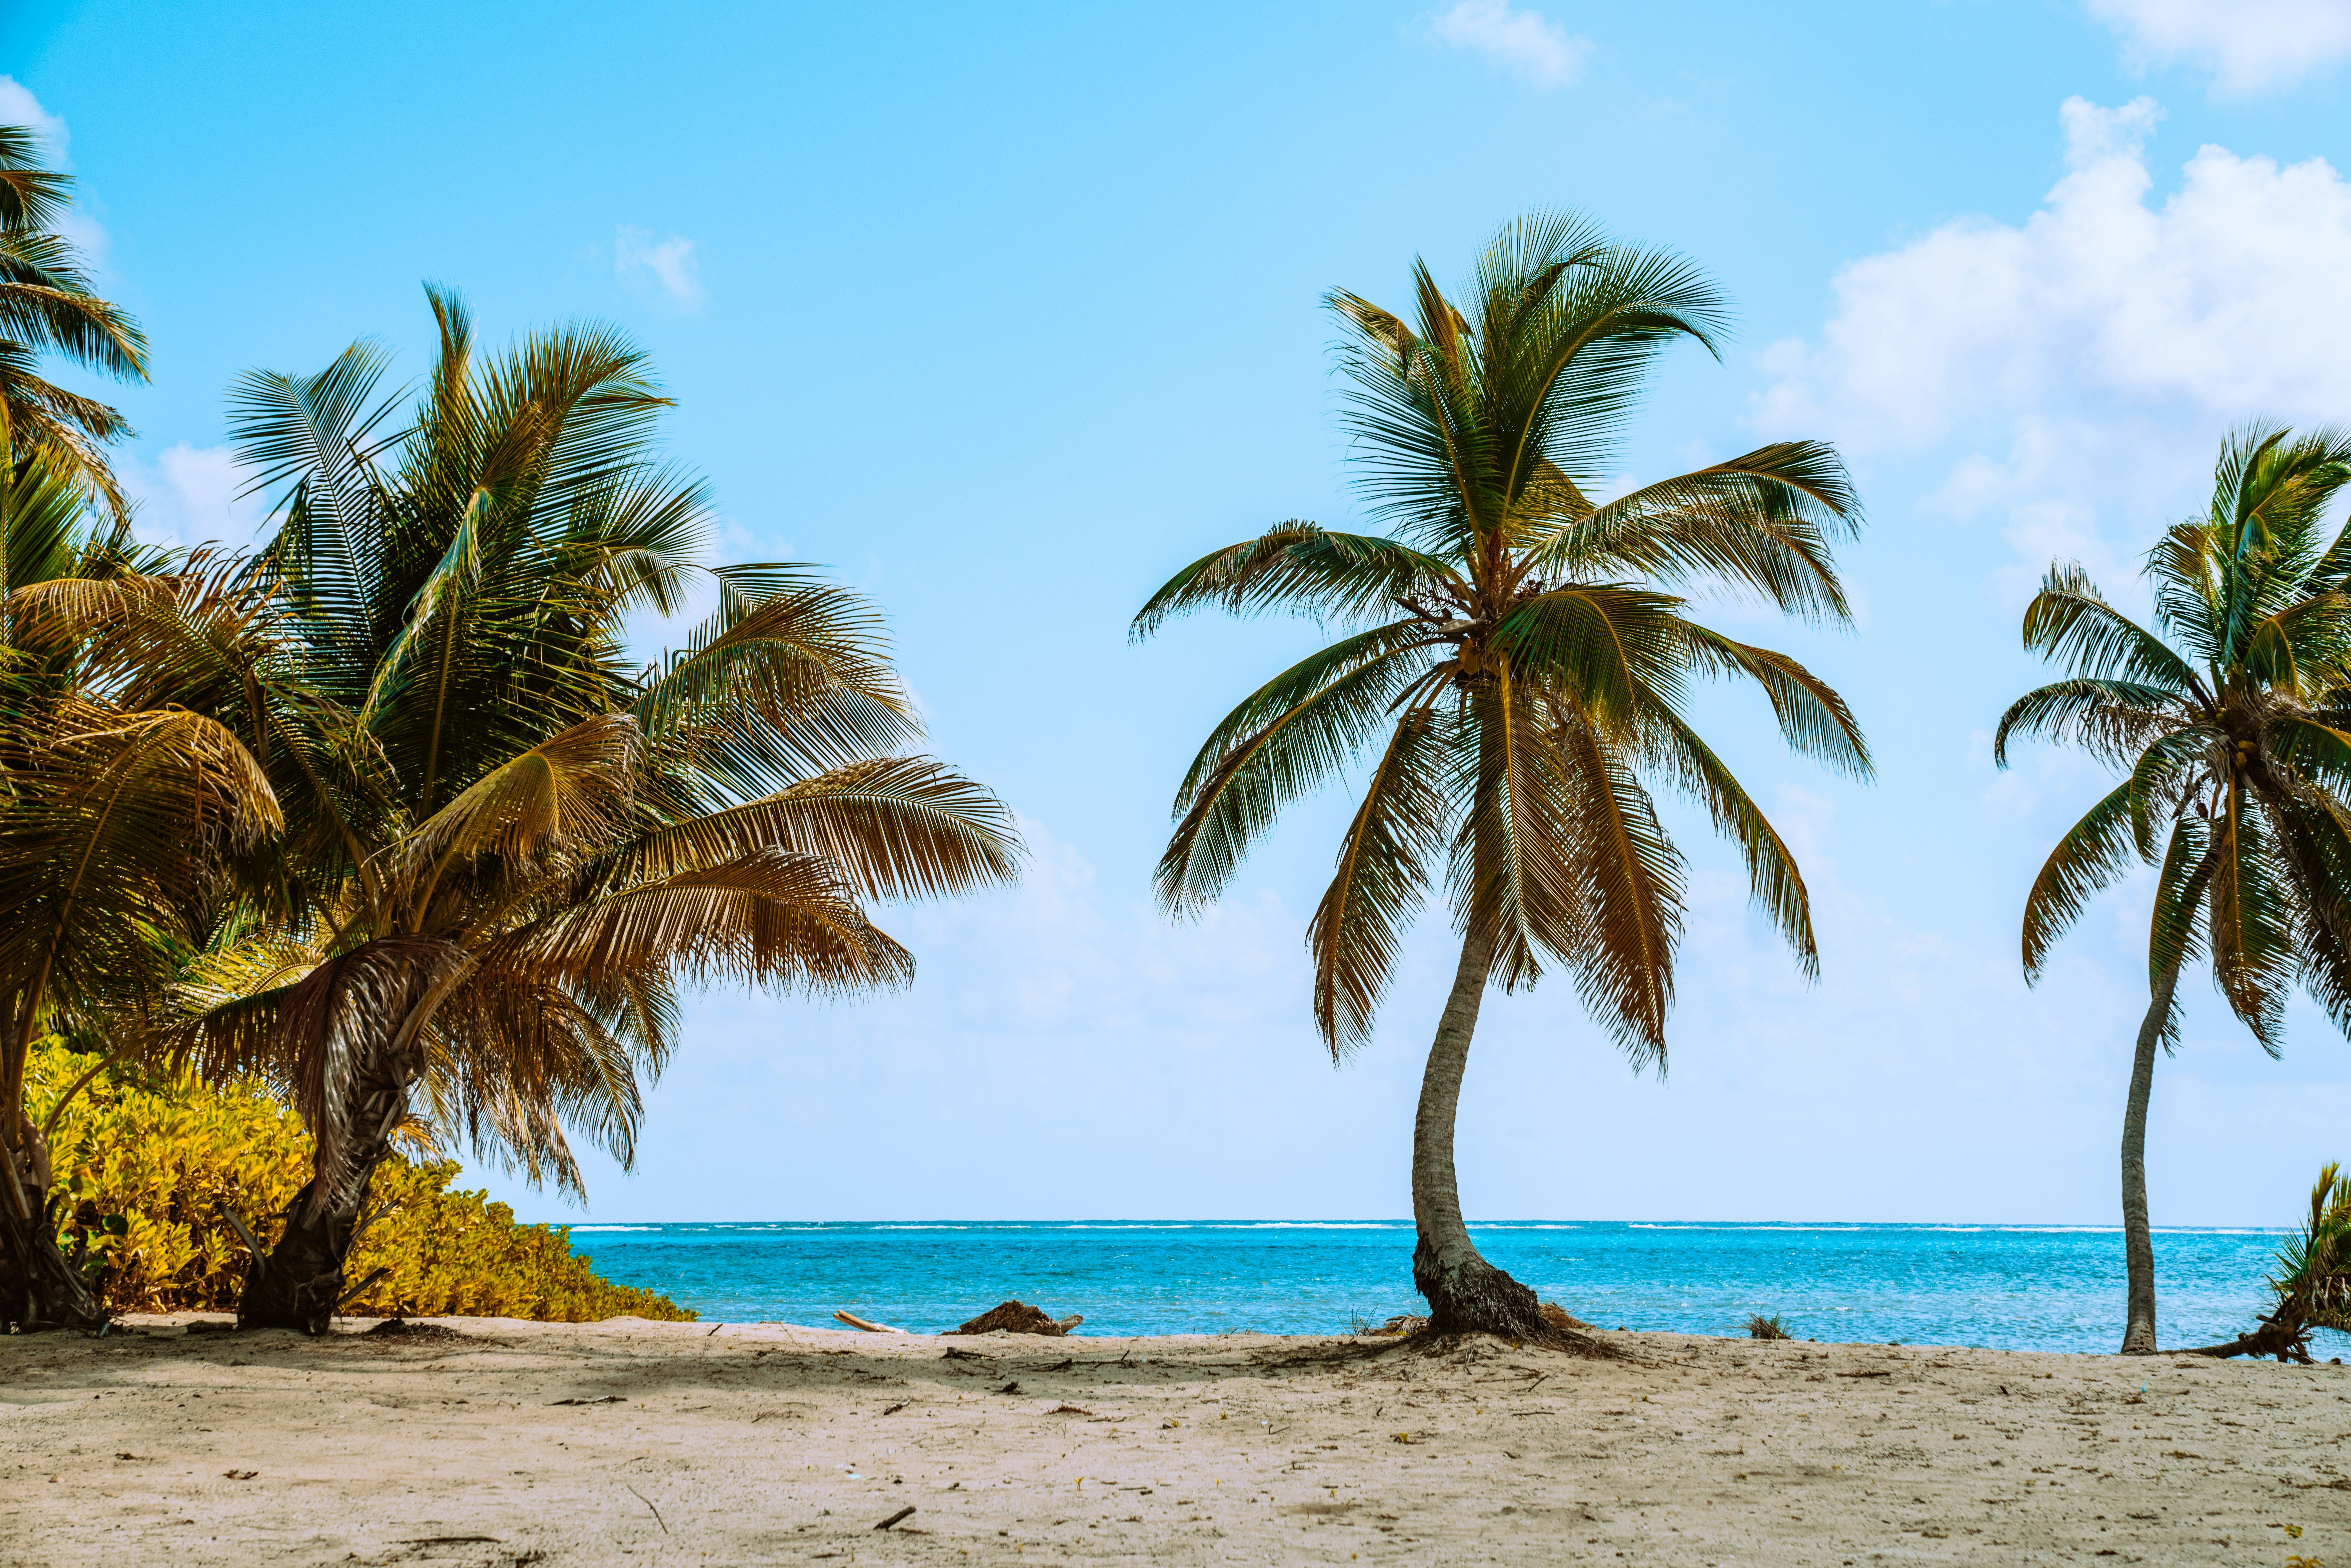 A Landscape Photo of an Island with crystal blue waters in the distance, sparse clouding, white sandy ground, and interspersed palm trees.